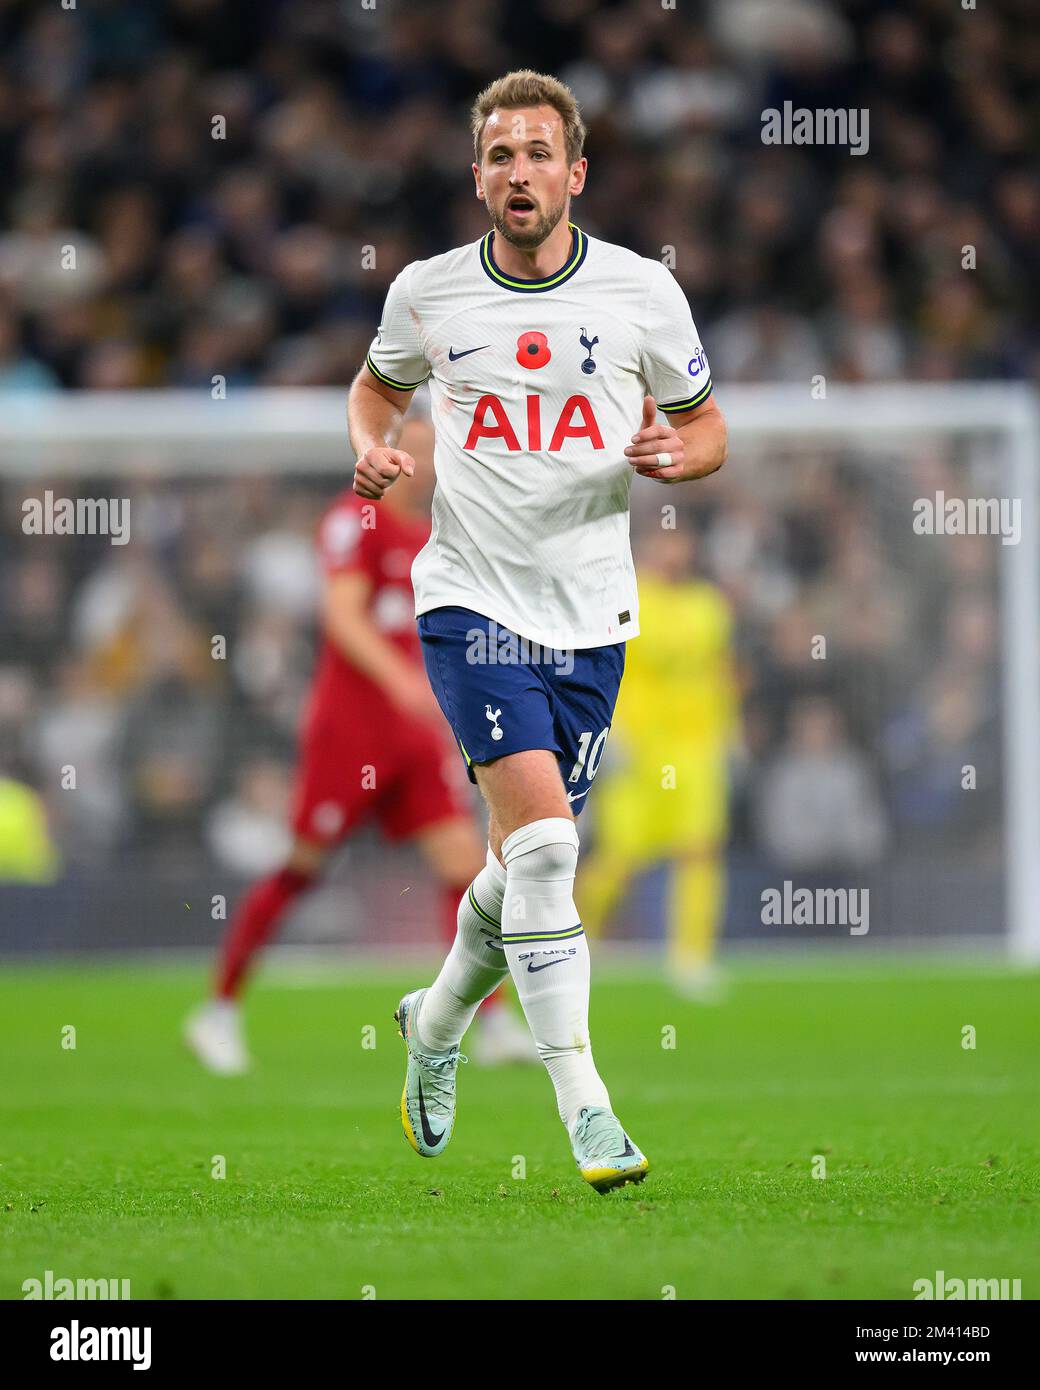 06 Nov 2022 - Tottenham Hotspur v Liverpool - Premier League - Tottenham Hotspur Stadium  Tottenham's Harry Kane during the match against Liverpool. Picture : Mark Pain / Alamy Stock Photo